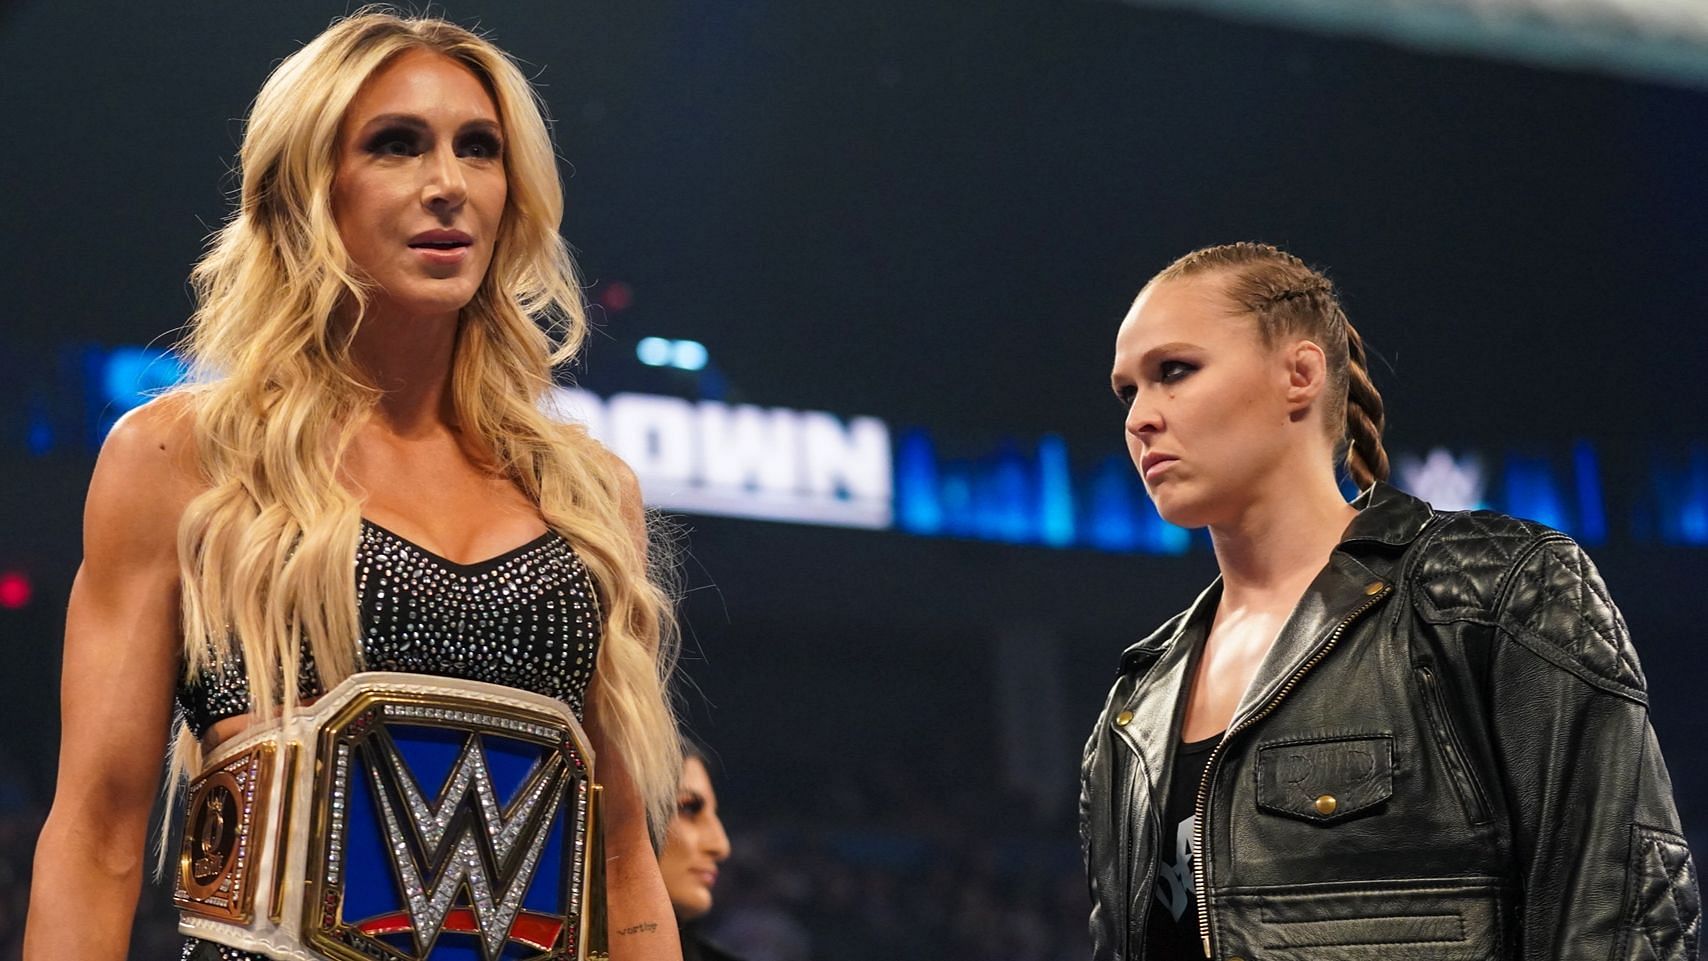 Charlotte Flair and Ronda Rousey faced off at WrestleMania 38.